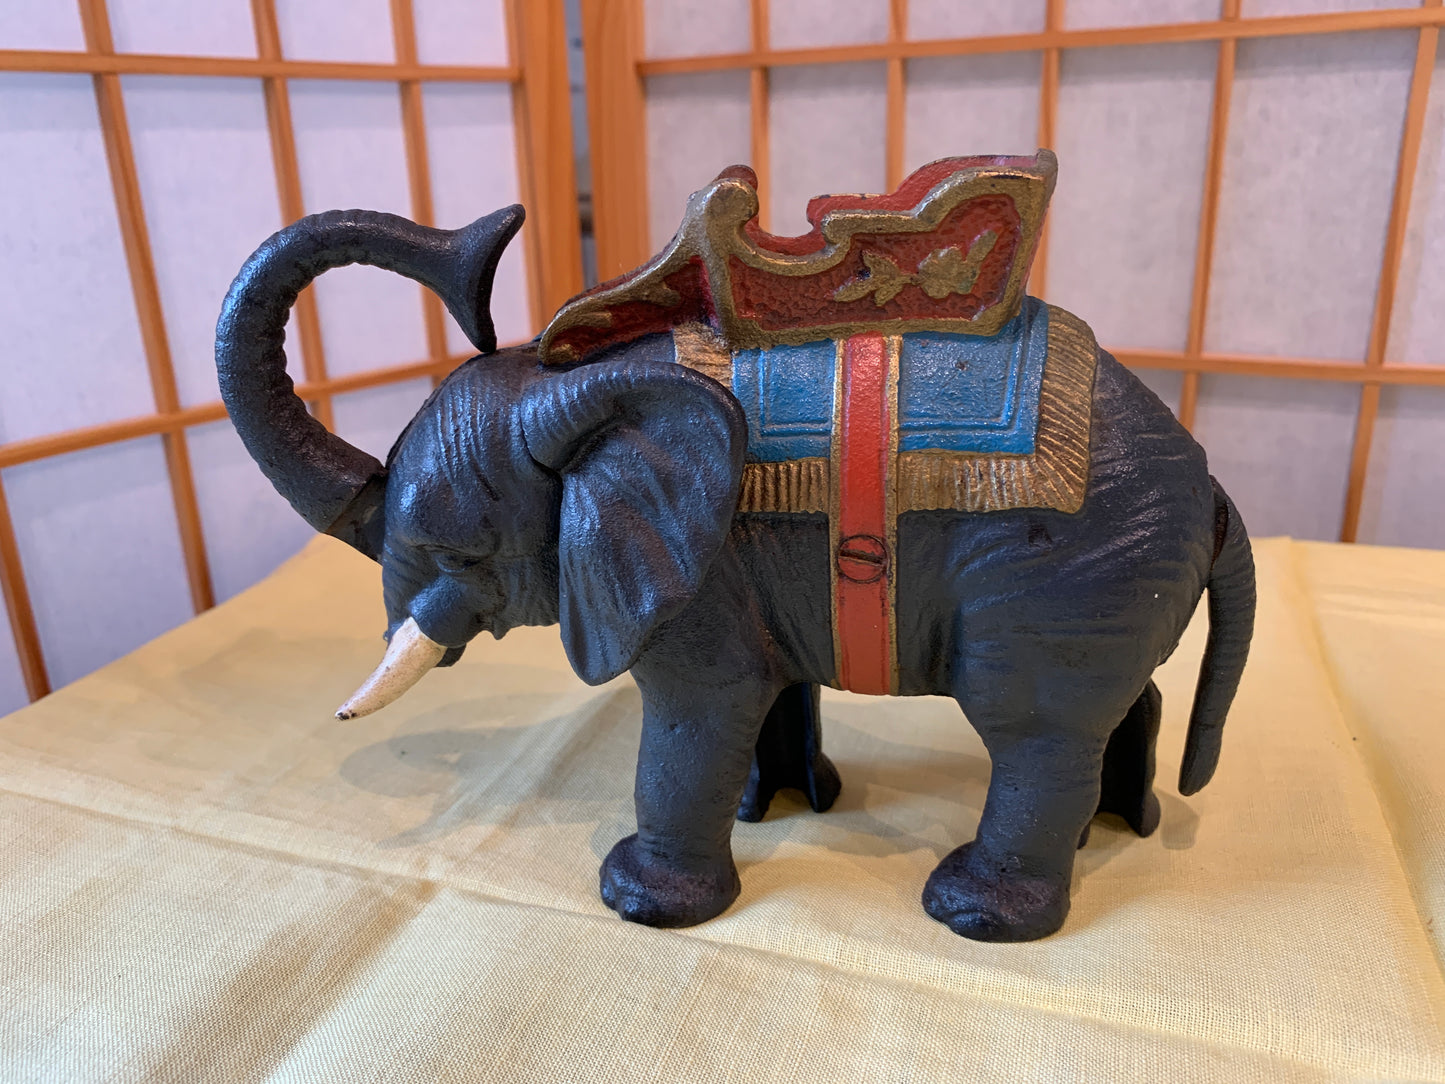 Cast Iron Elephant Coin Bank, Mechanical, works great, good vintage, 1930's.